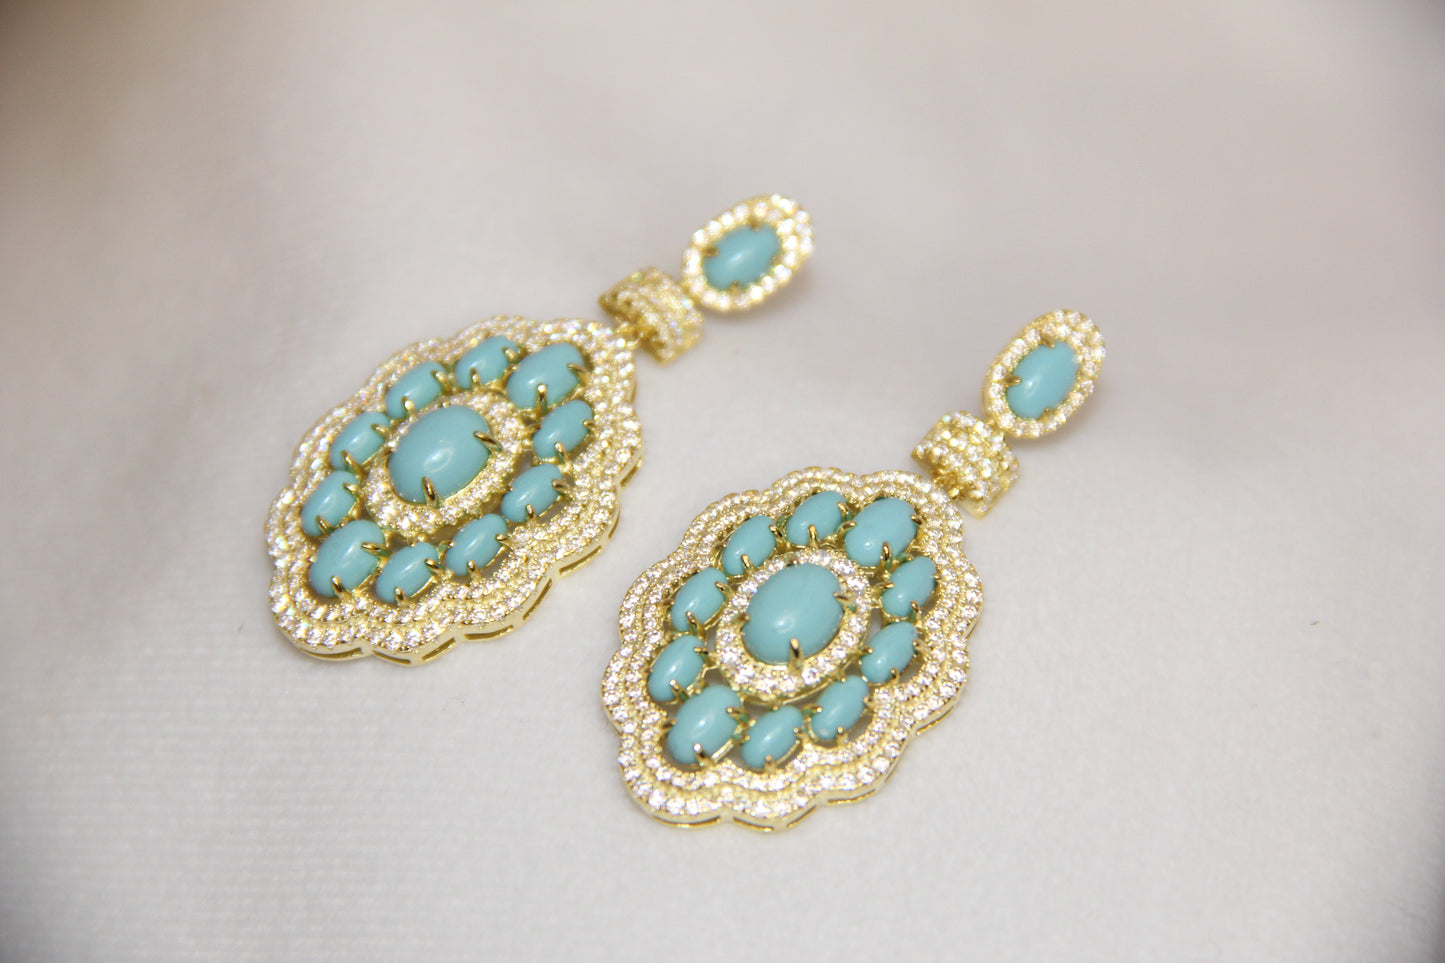 Turquoise and Cubic Zirconia Earrings in Gold Plated Sterling Silver